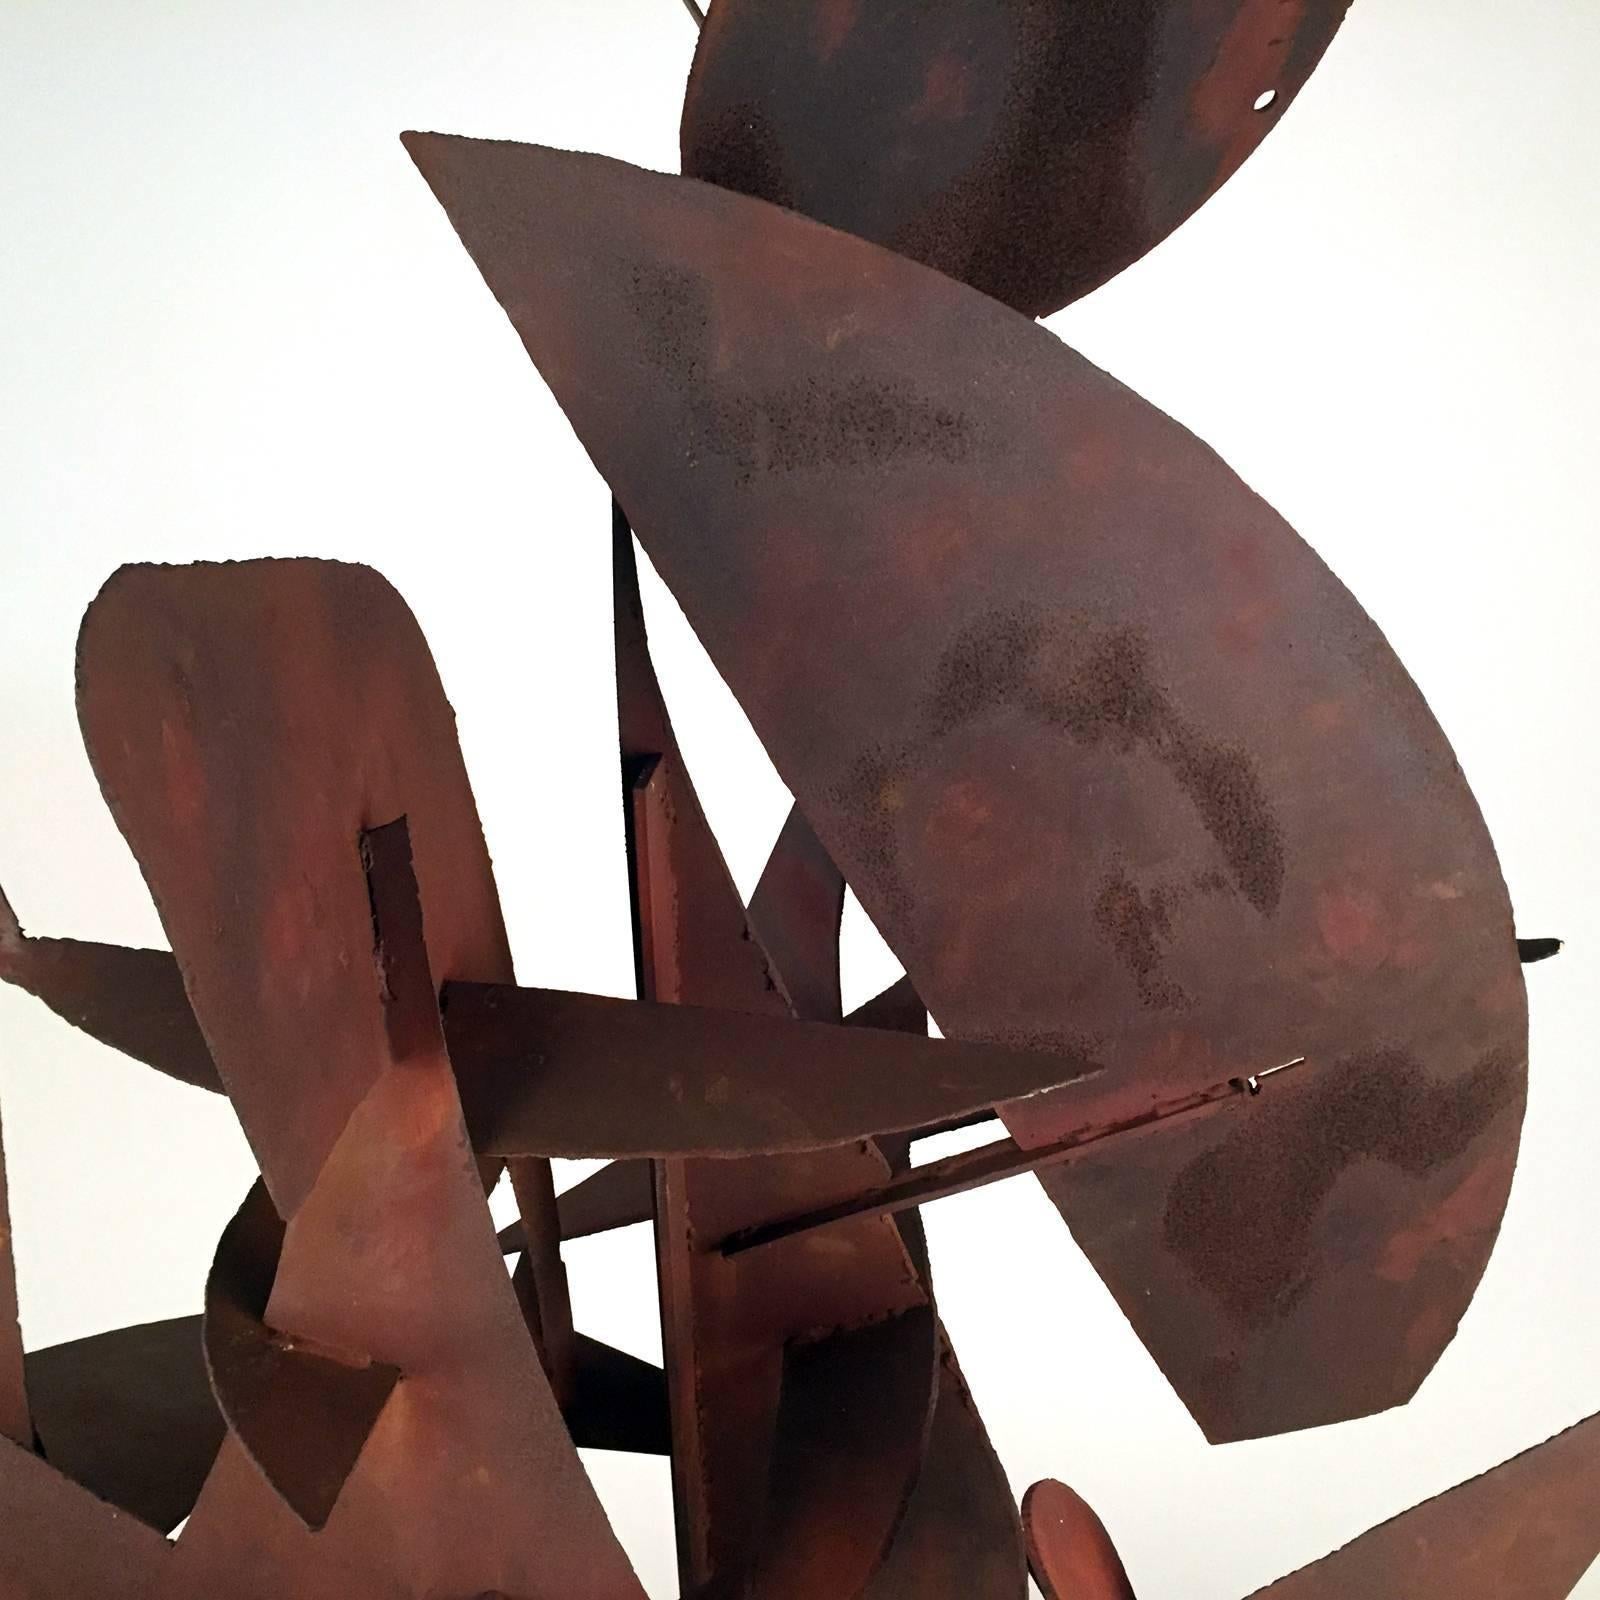 Large modernist, abstract, steel Sculpture by Southern California artist: Paul Kasper. Kasper lived and worked in Whittier, California. He taught at Pasadena School of Fine Arts, Scripps, and Otis Art Institute. He was an architect, photographer,